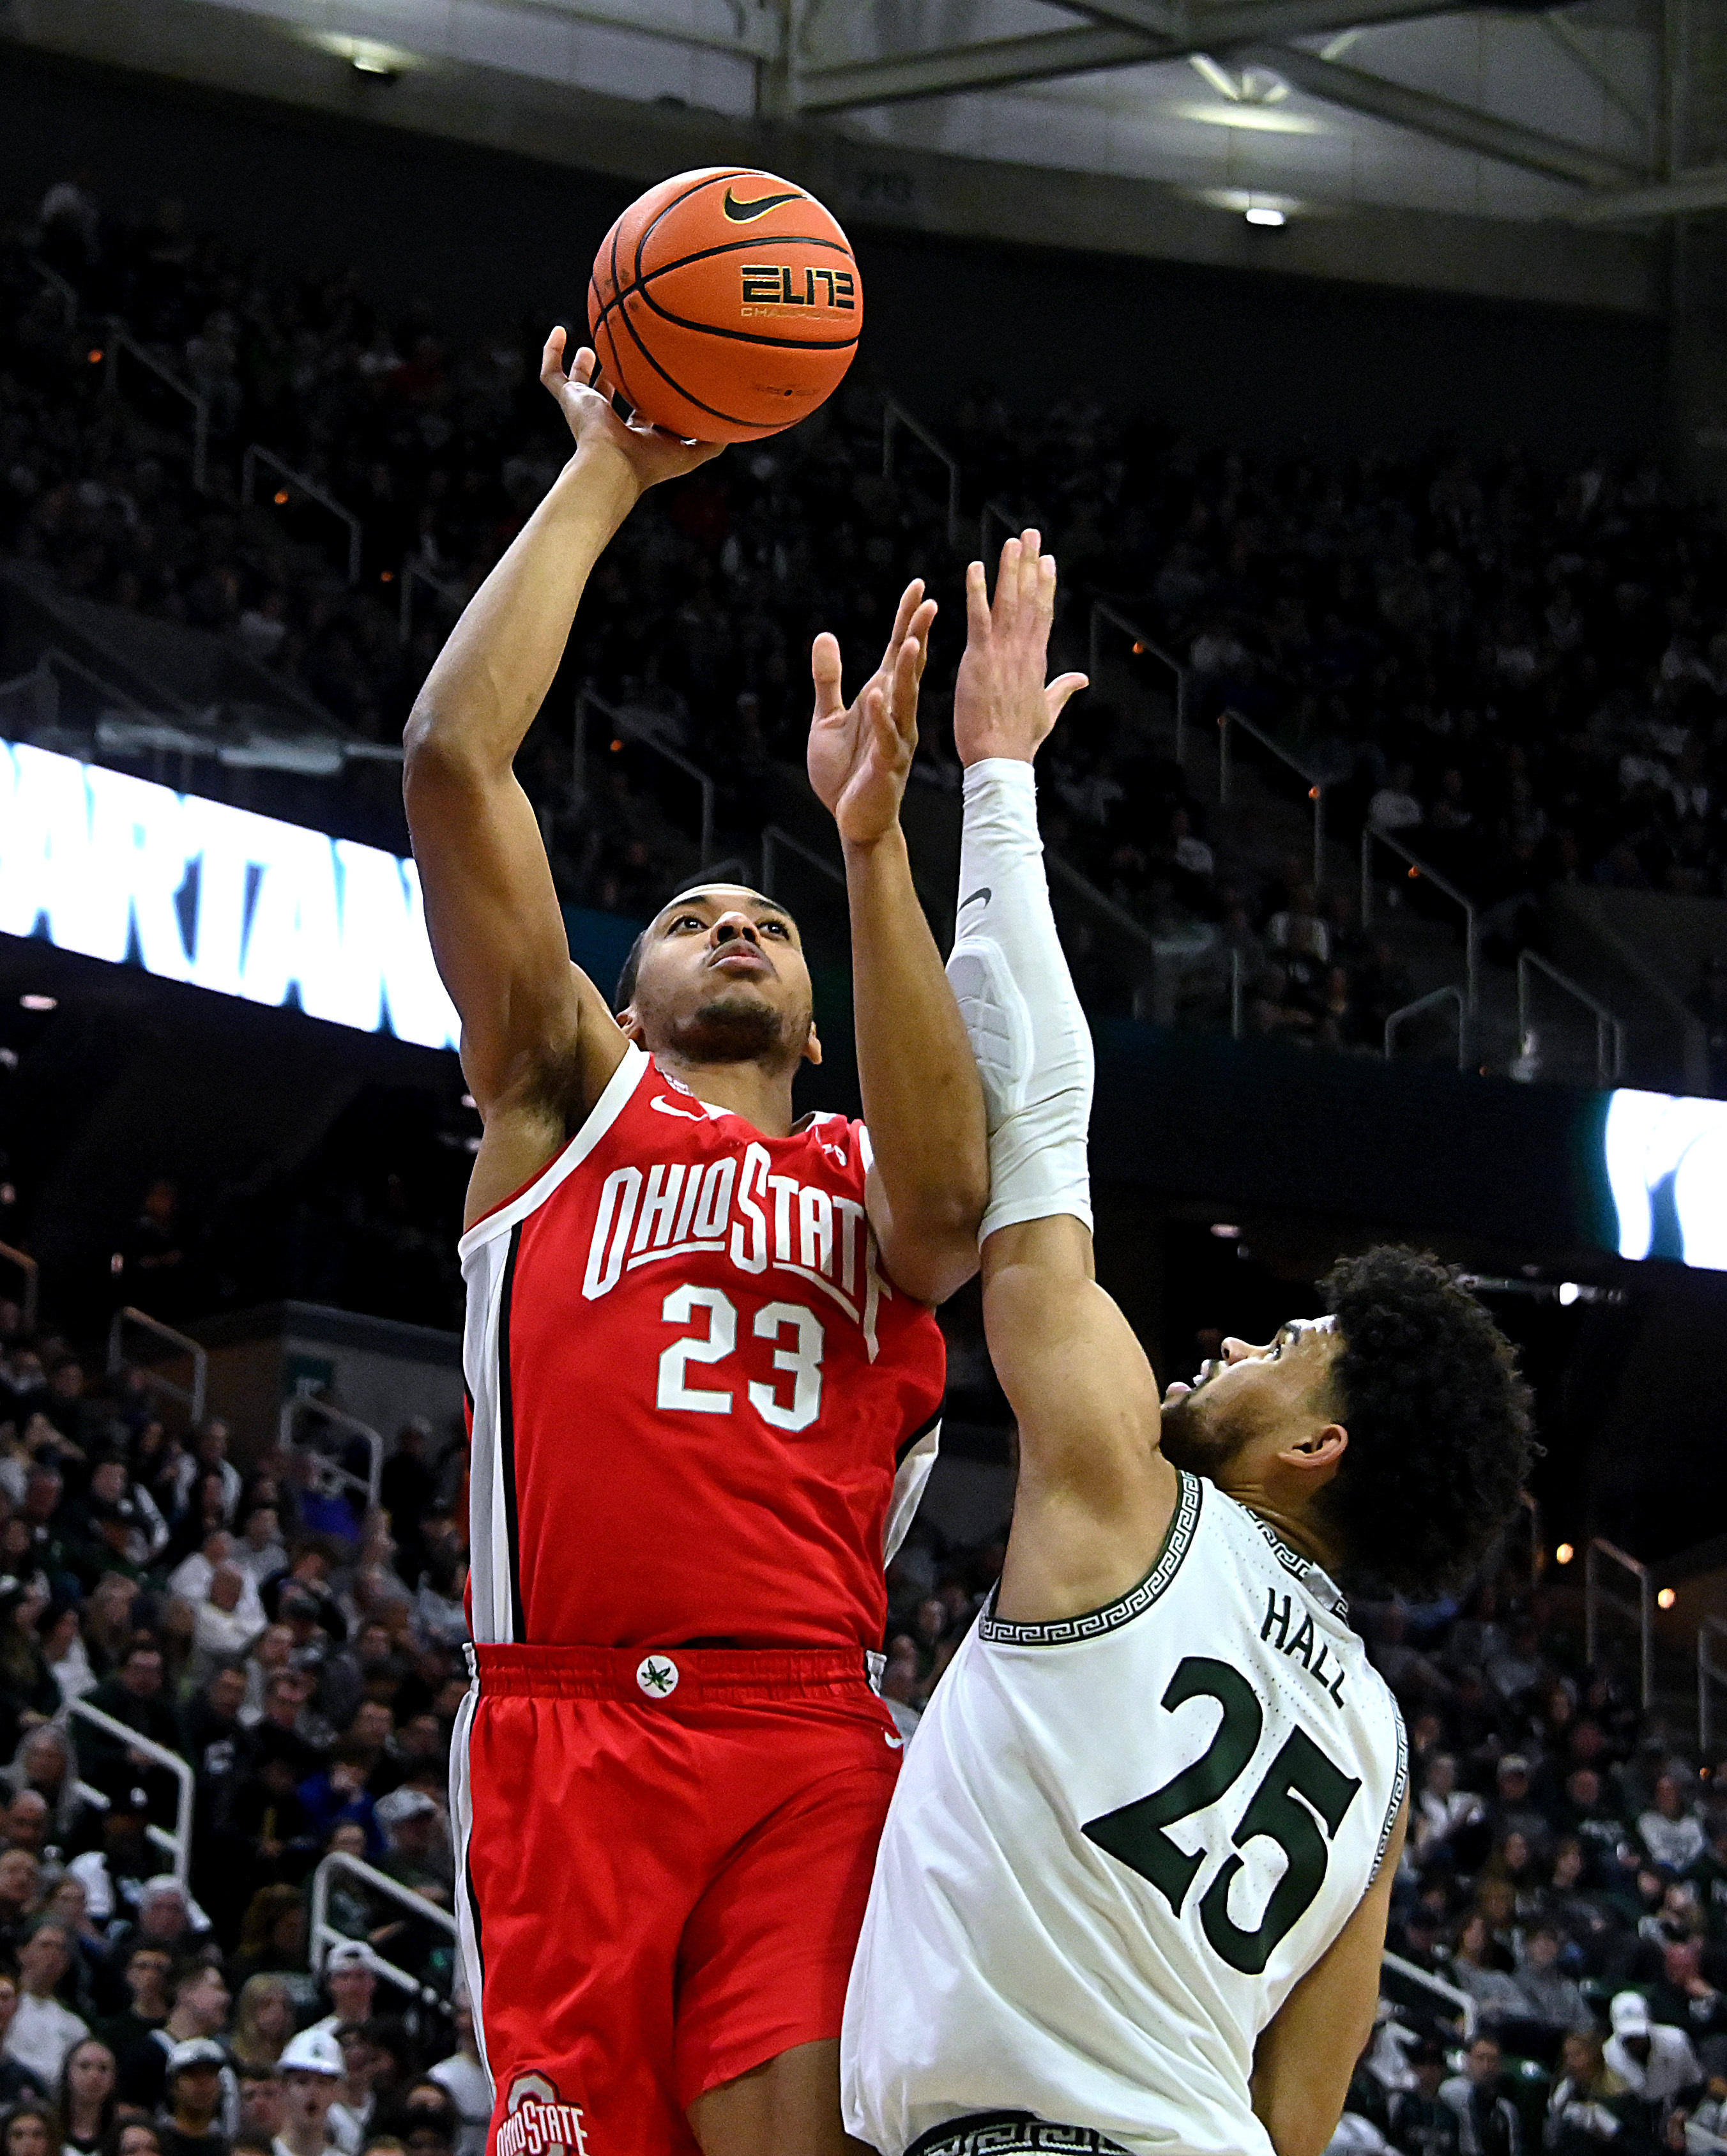 Ohio State's Dale Bonner hits wild buzzer-beater to lift Buckeyes past  Michigan State - Yahoo Sports